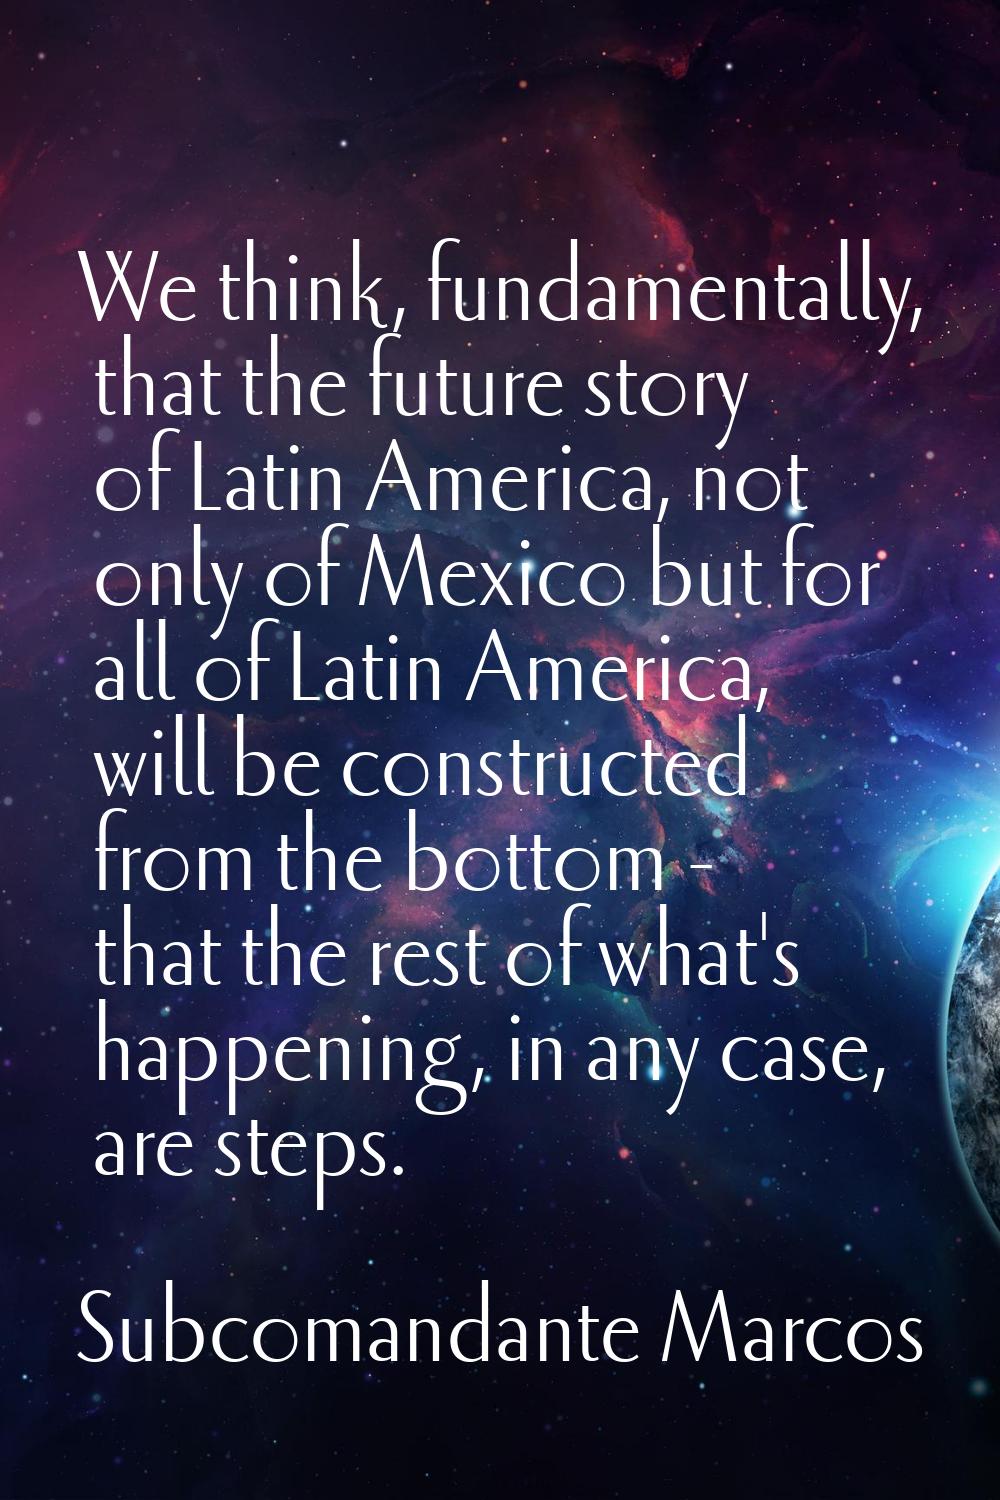 We think, fundamentally, that the future story of Latin America, not only of Mexico but for all of 